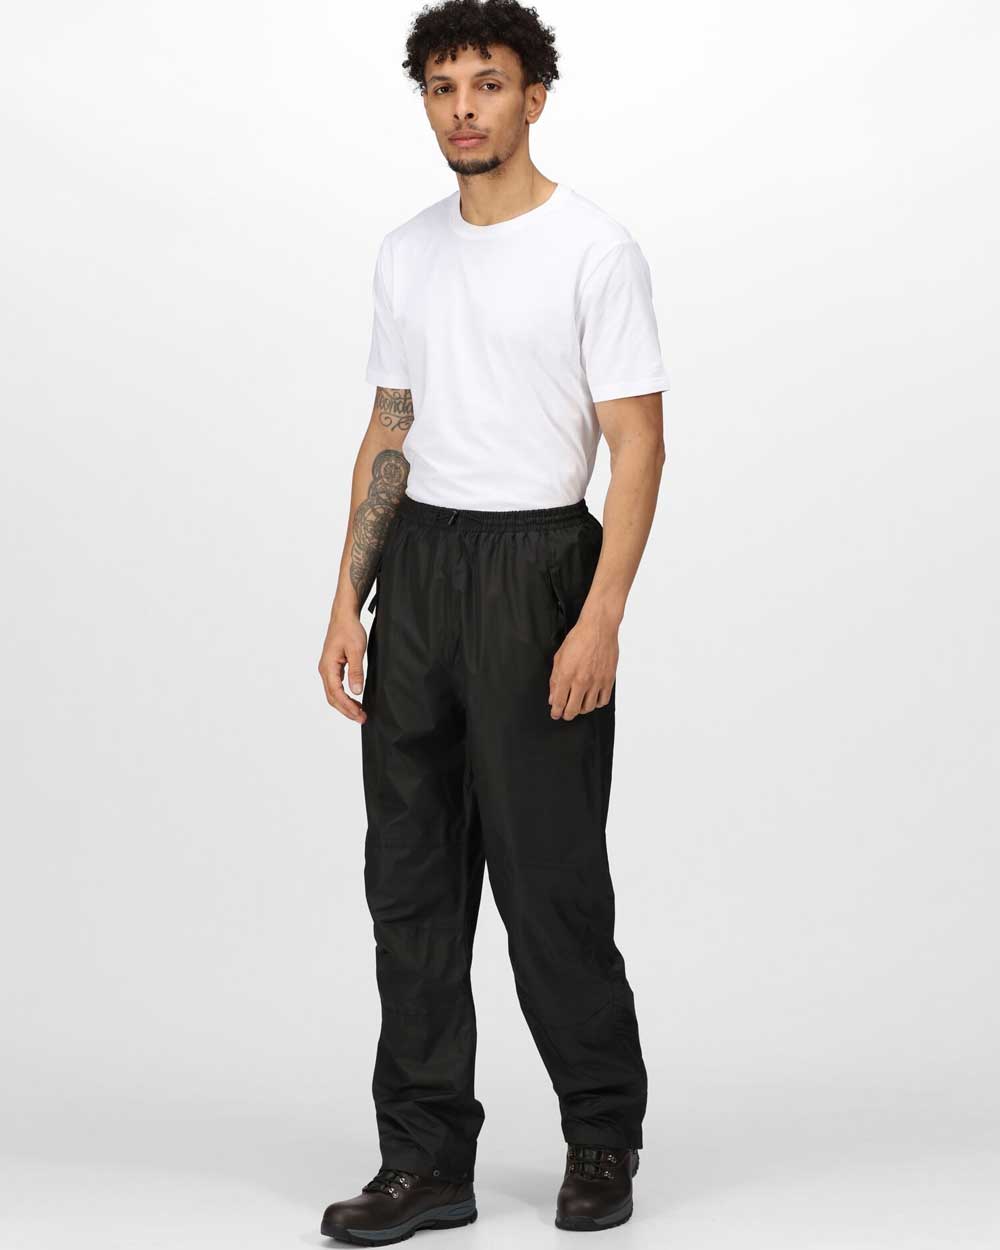 Regatta Linton Breathable Lined Overtrousers in Black 